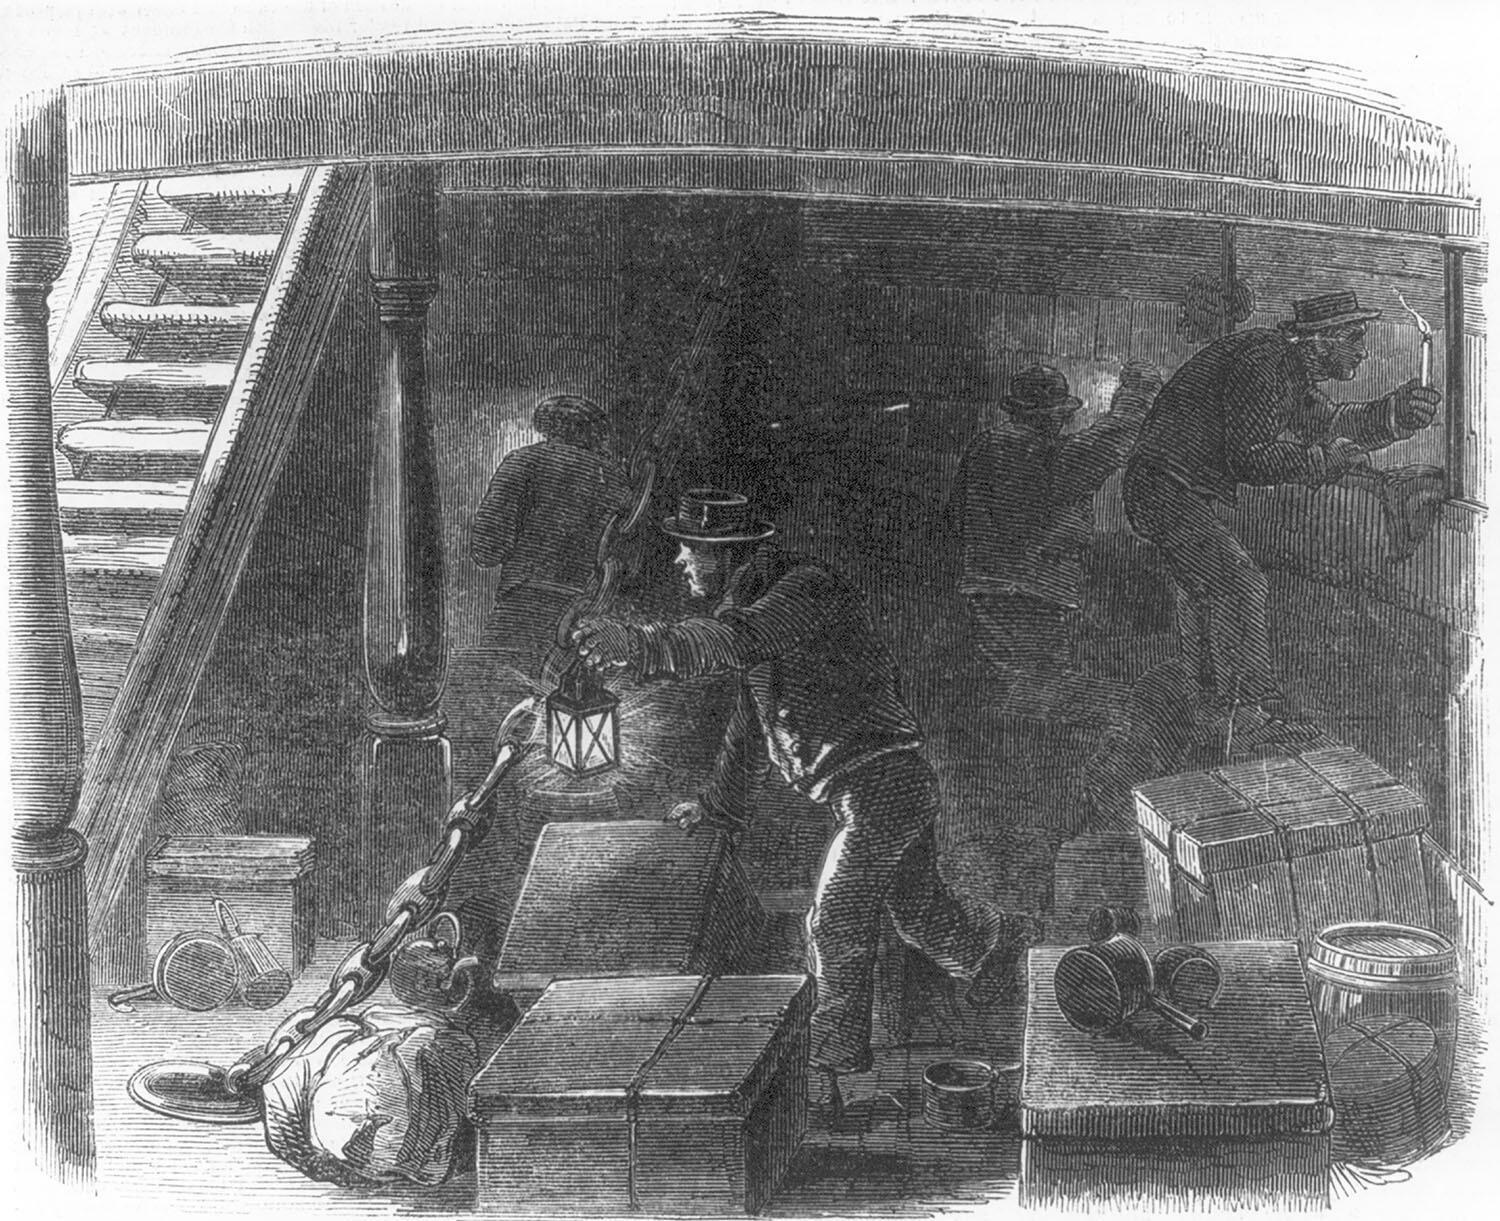 British sailors use lanterns hunt for stowaways in a merchant ship’s hold in this 19th-century etching. (Image courtesy of the Library of Congress.)